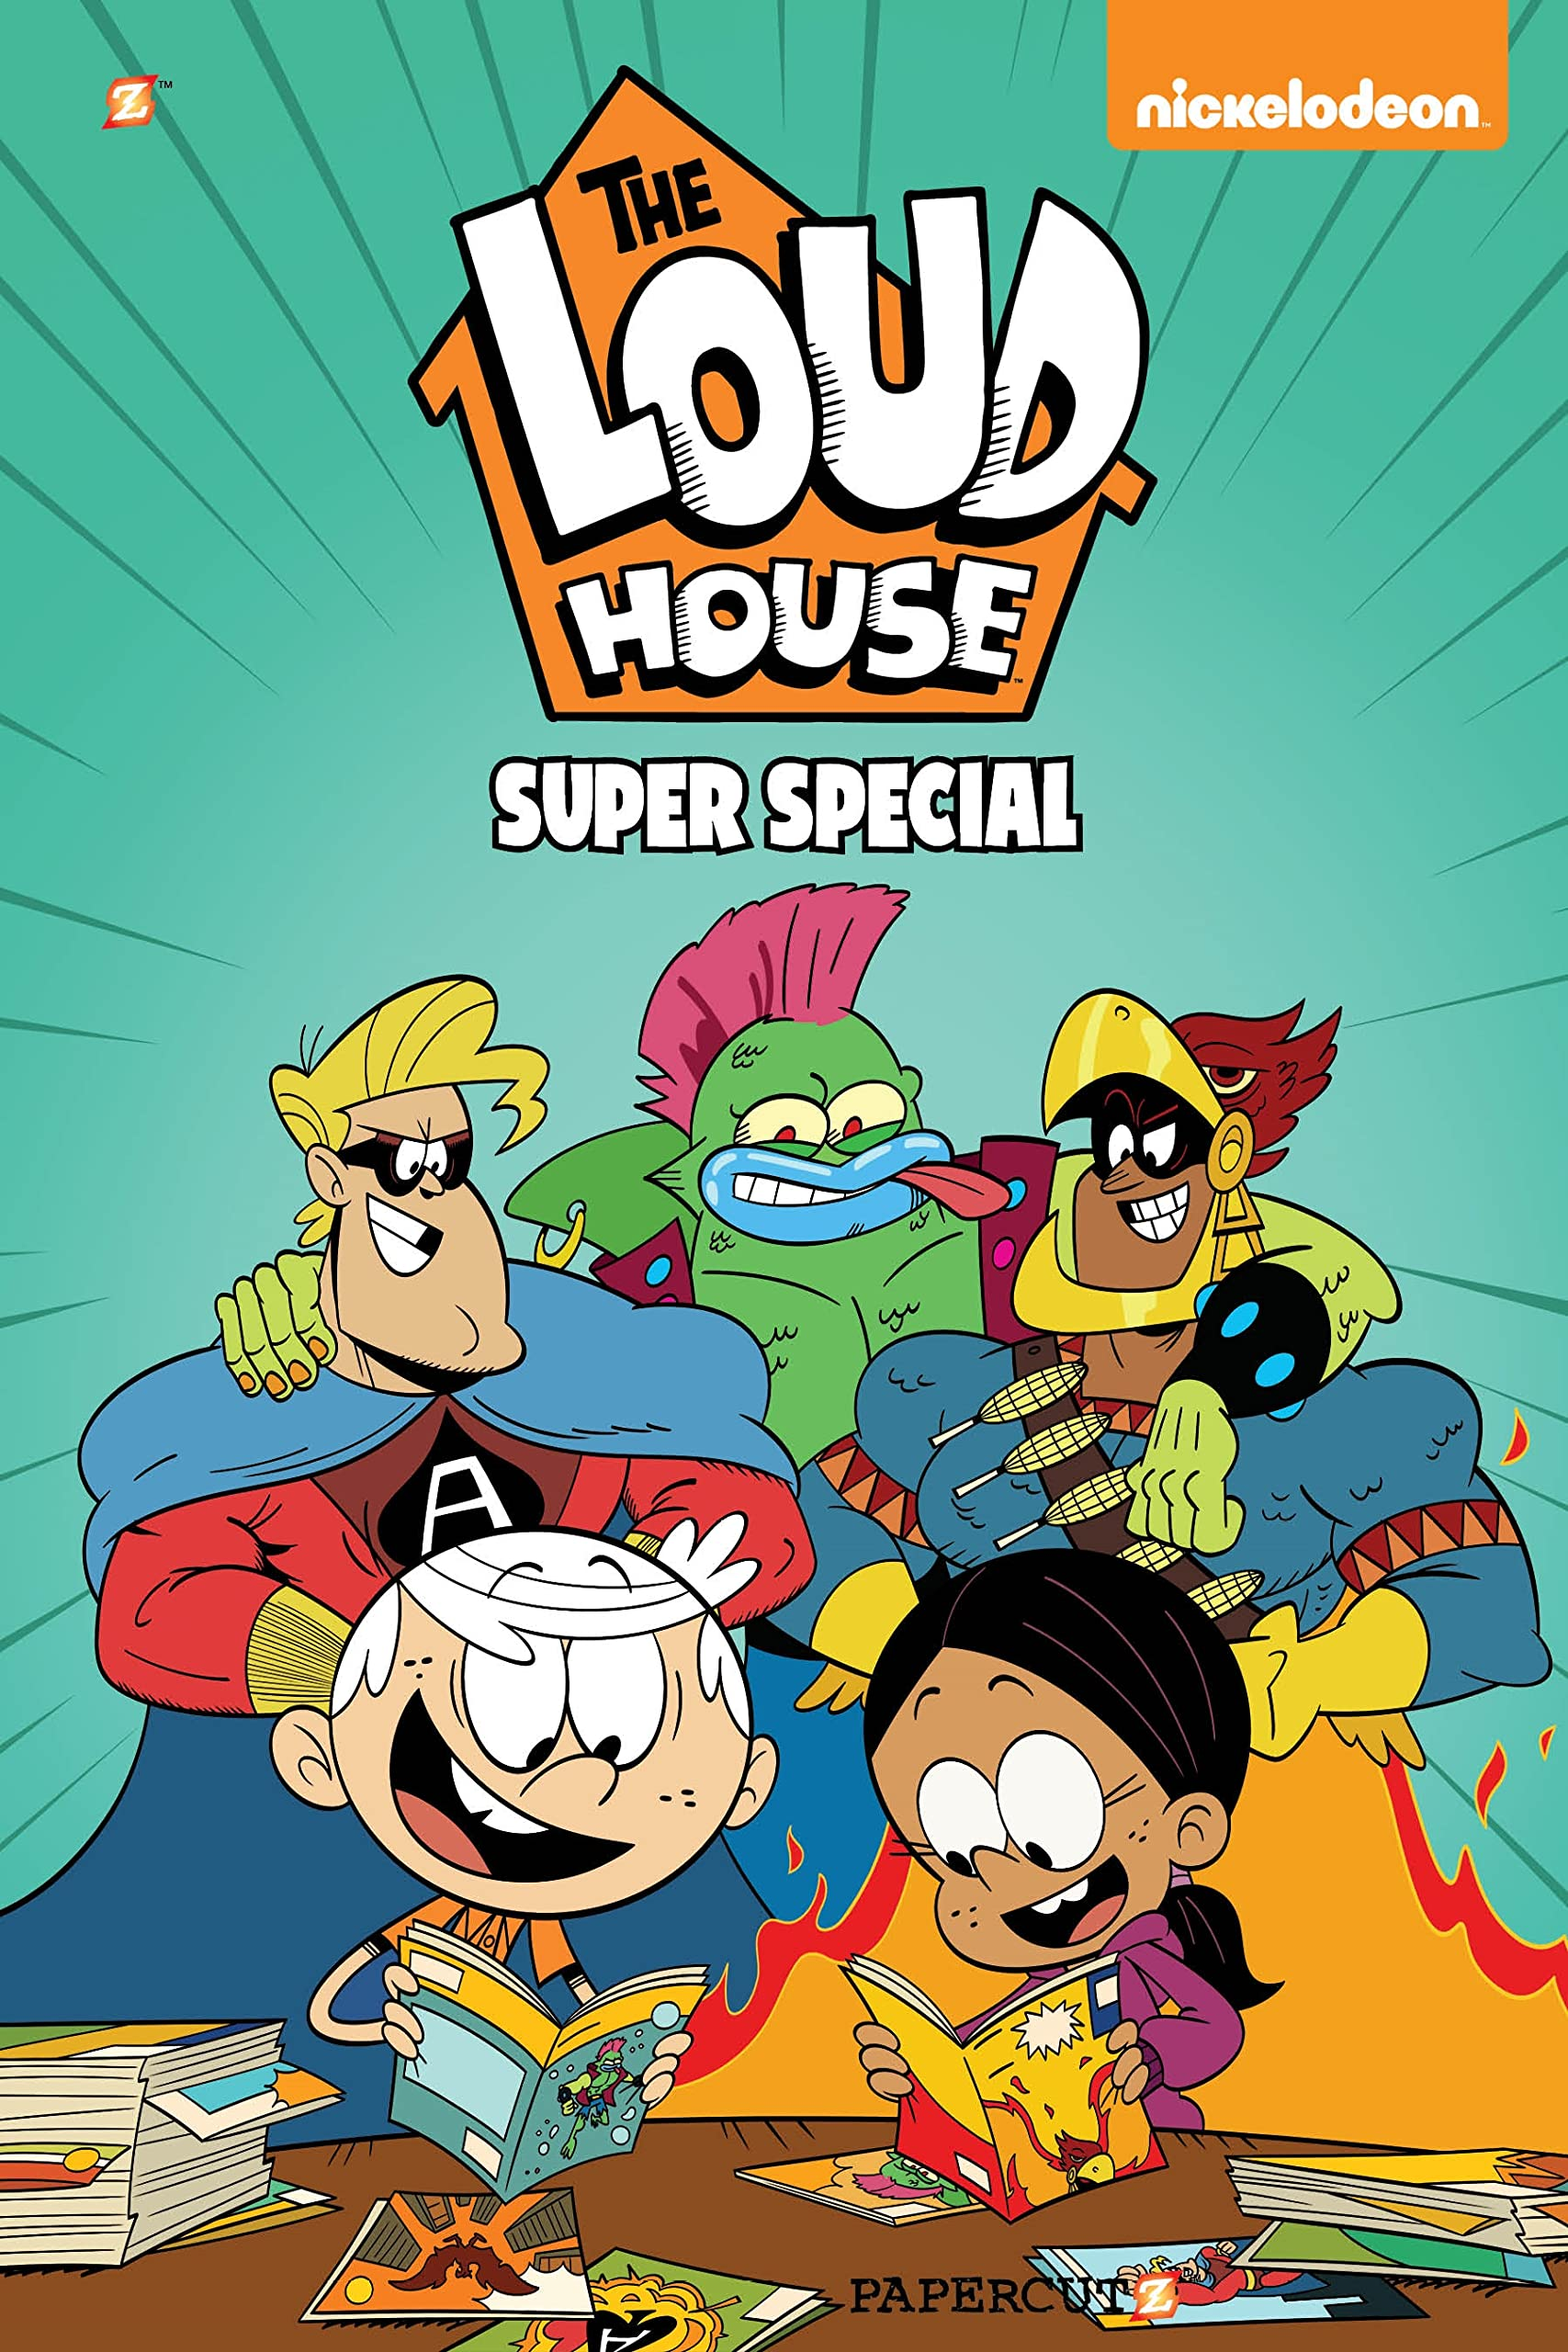 Super Special, The Loud House Encyclopedia